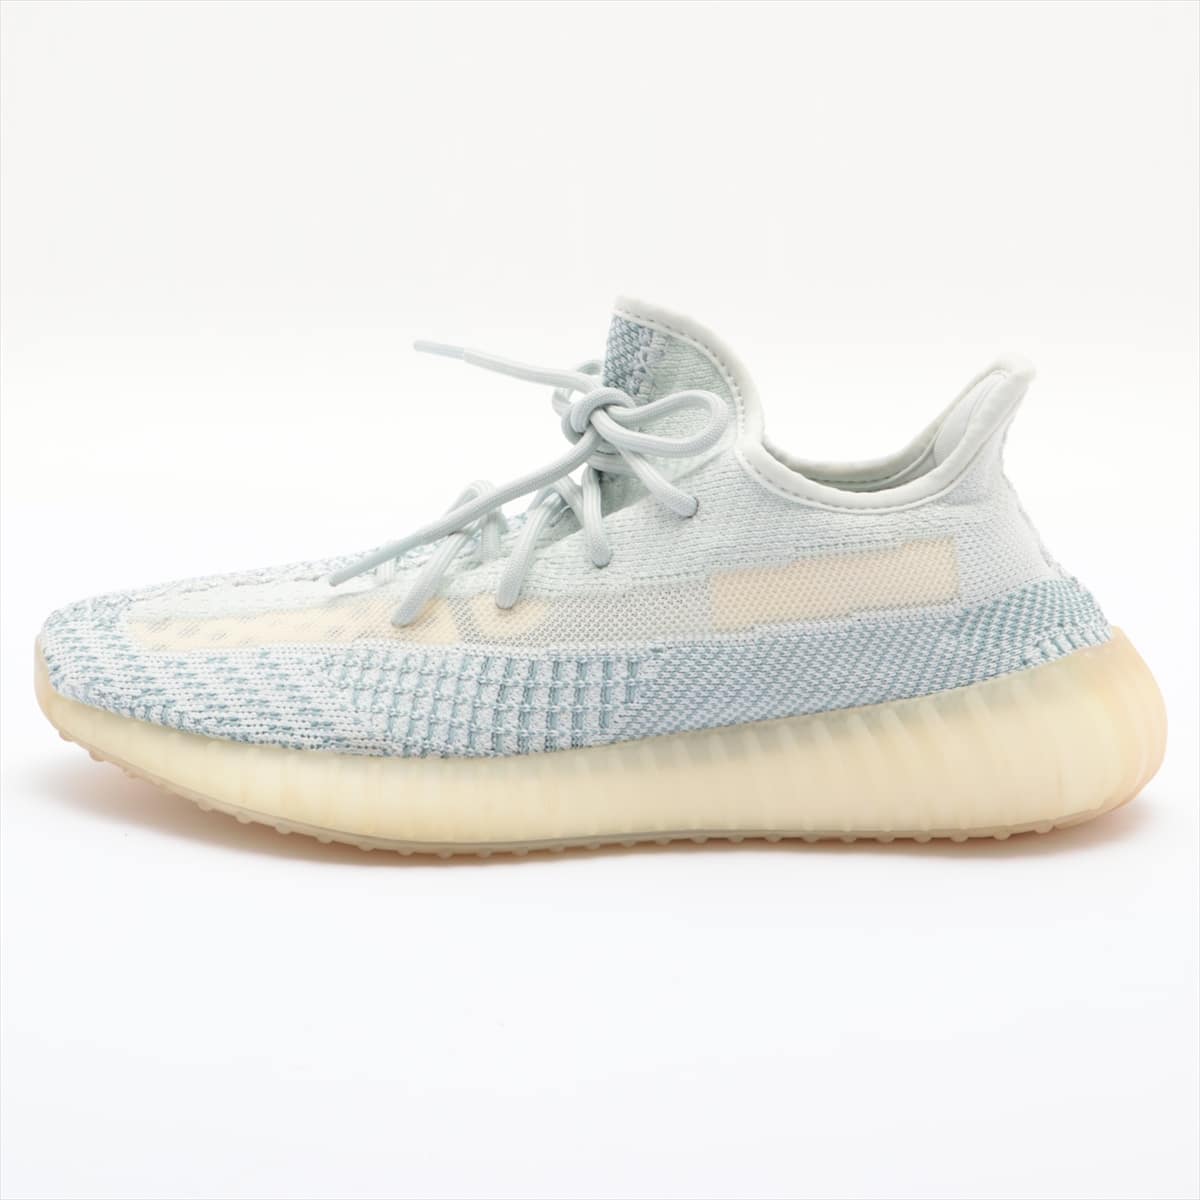 Adidas YEEZY BOOST 350 V2 2019 Fabric Sneakers 27.0cm Men's White CLOUD WHITE FW3043